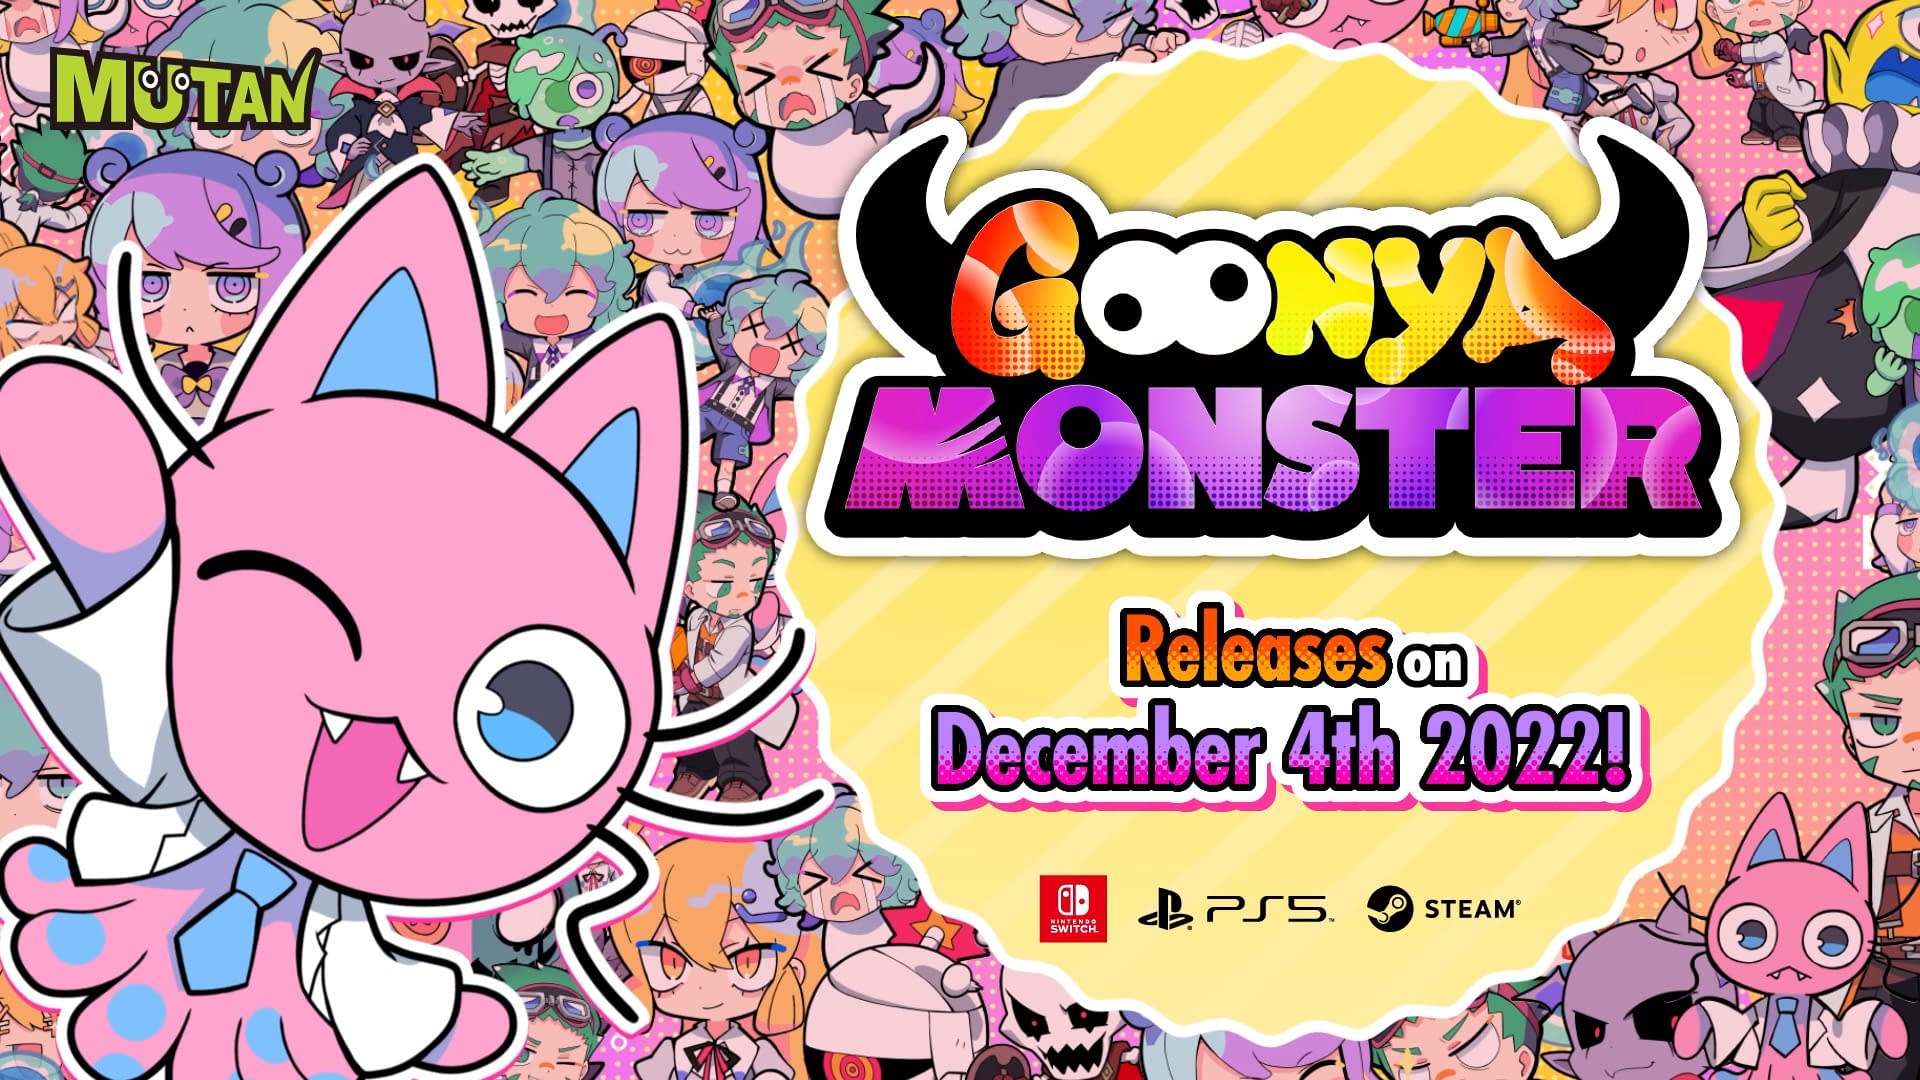 Goonya Monster Comes to PS5, Switch and PC on December 4